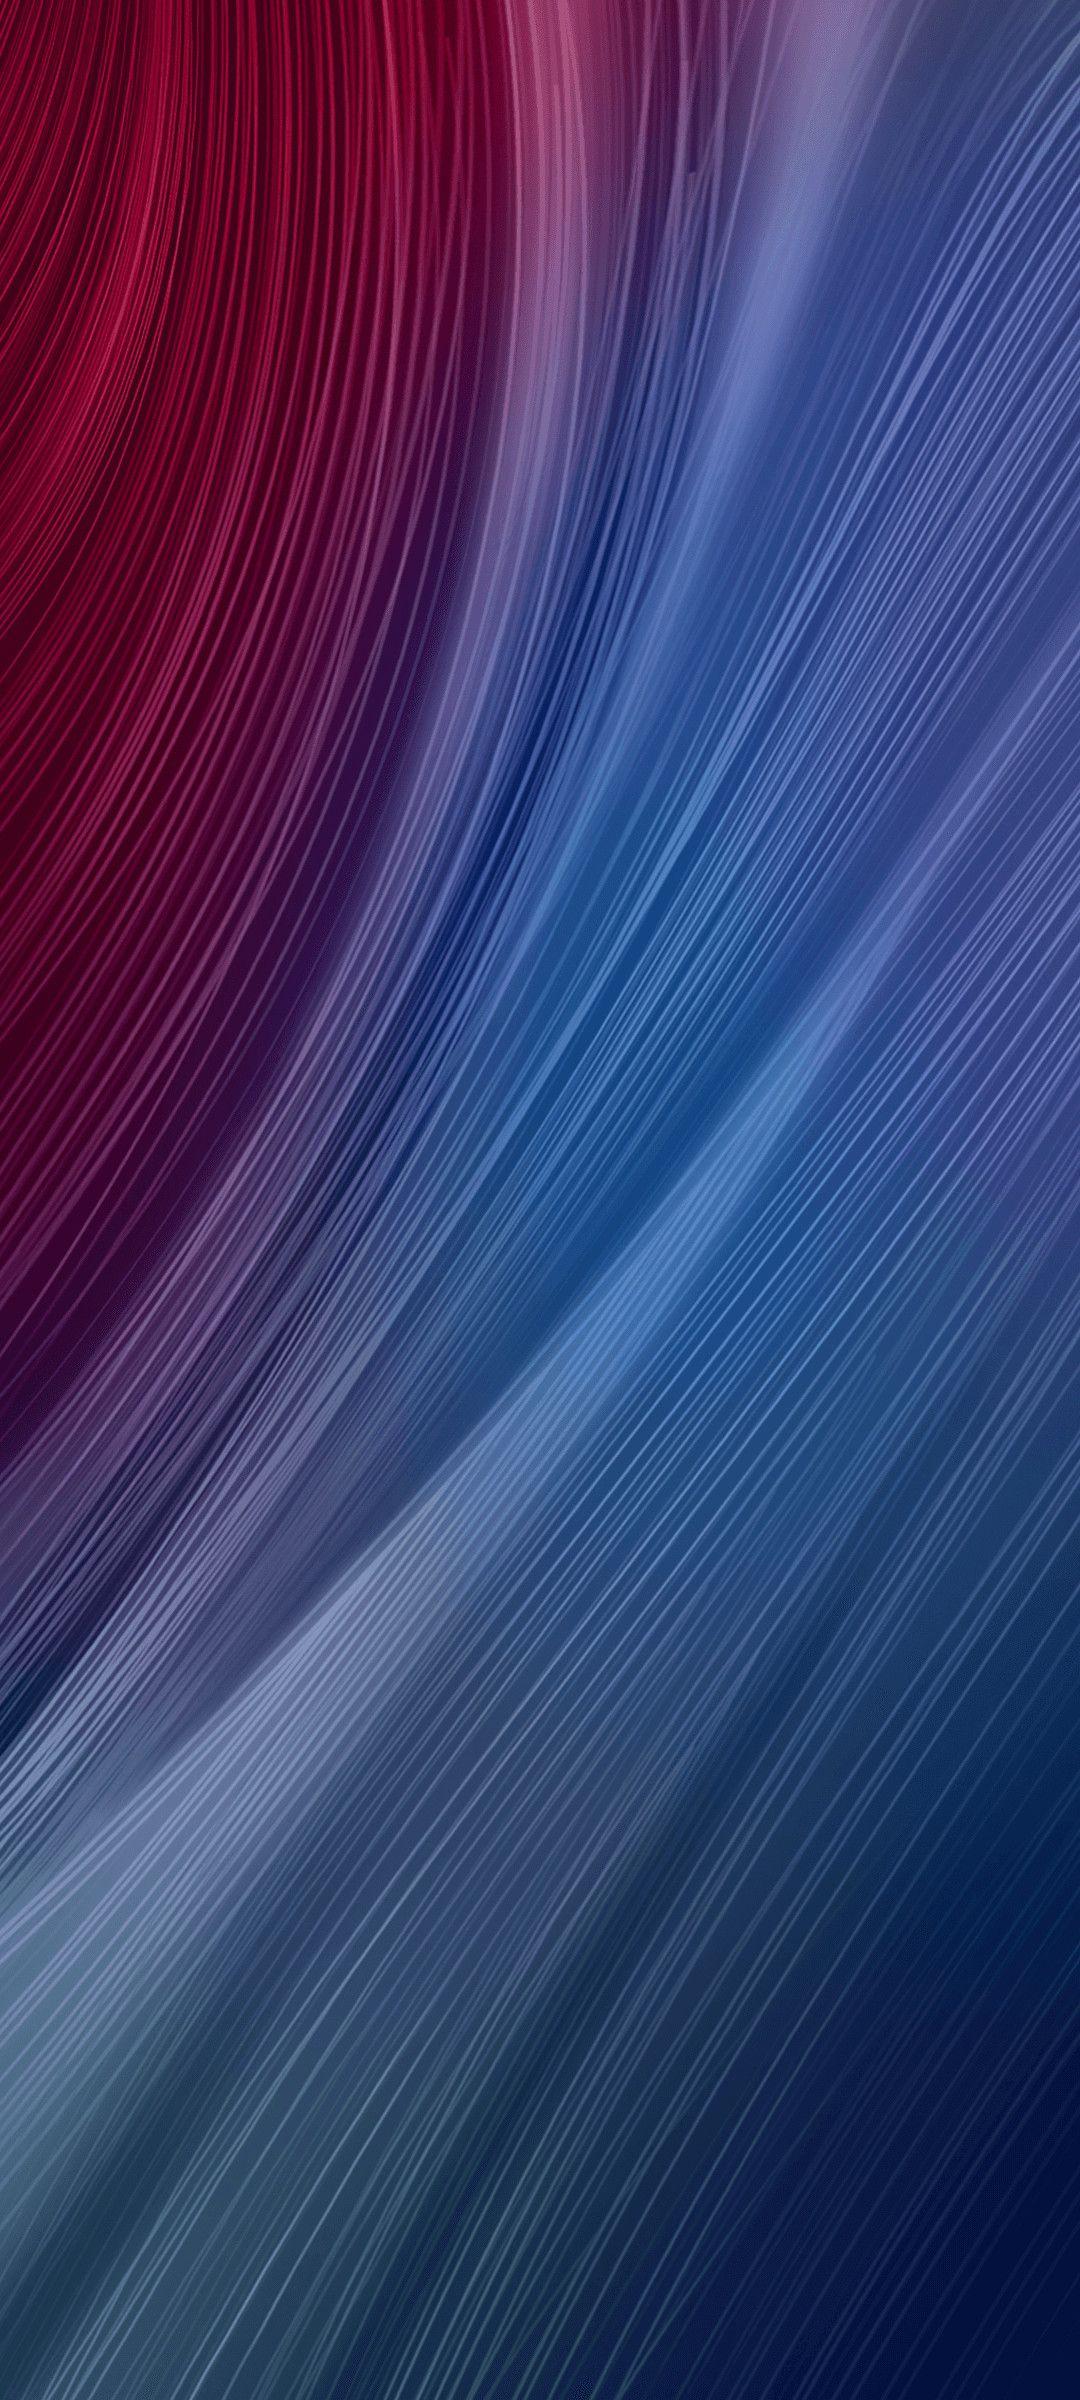 1080x2400 Wallpapers - Top Free 1080x2400 Backgrounds - WallpaperAccess